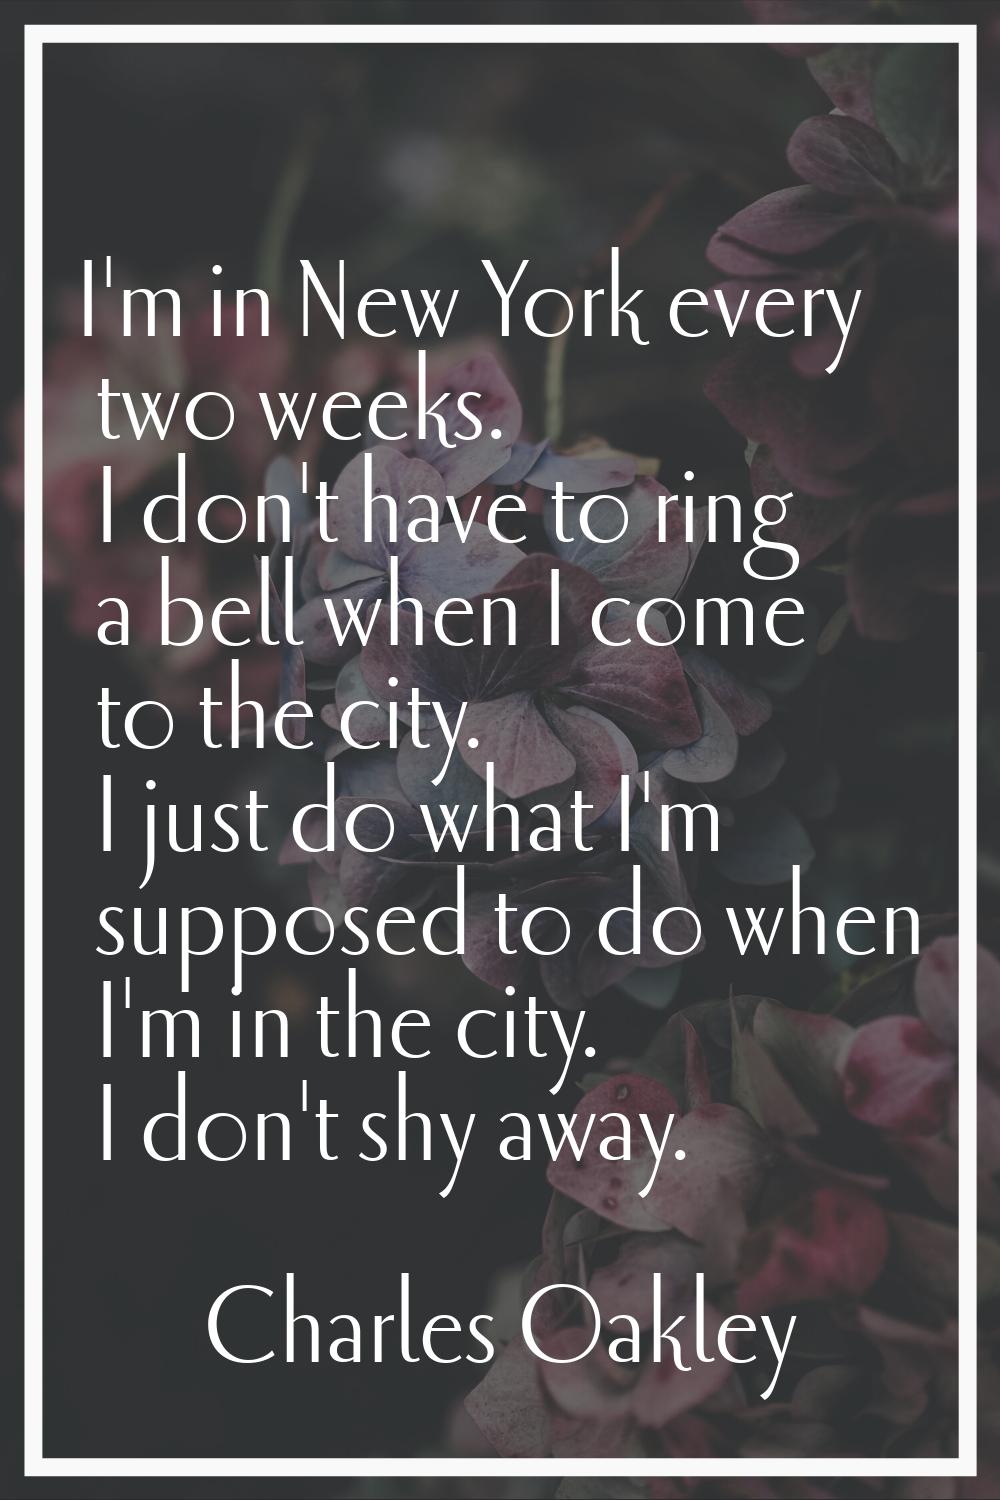 I'm in New York every two weeks. I don't have to ring a bell when I come to the city. I just do wha